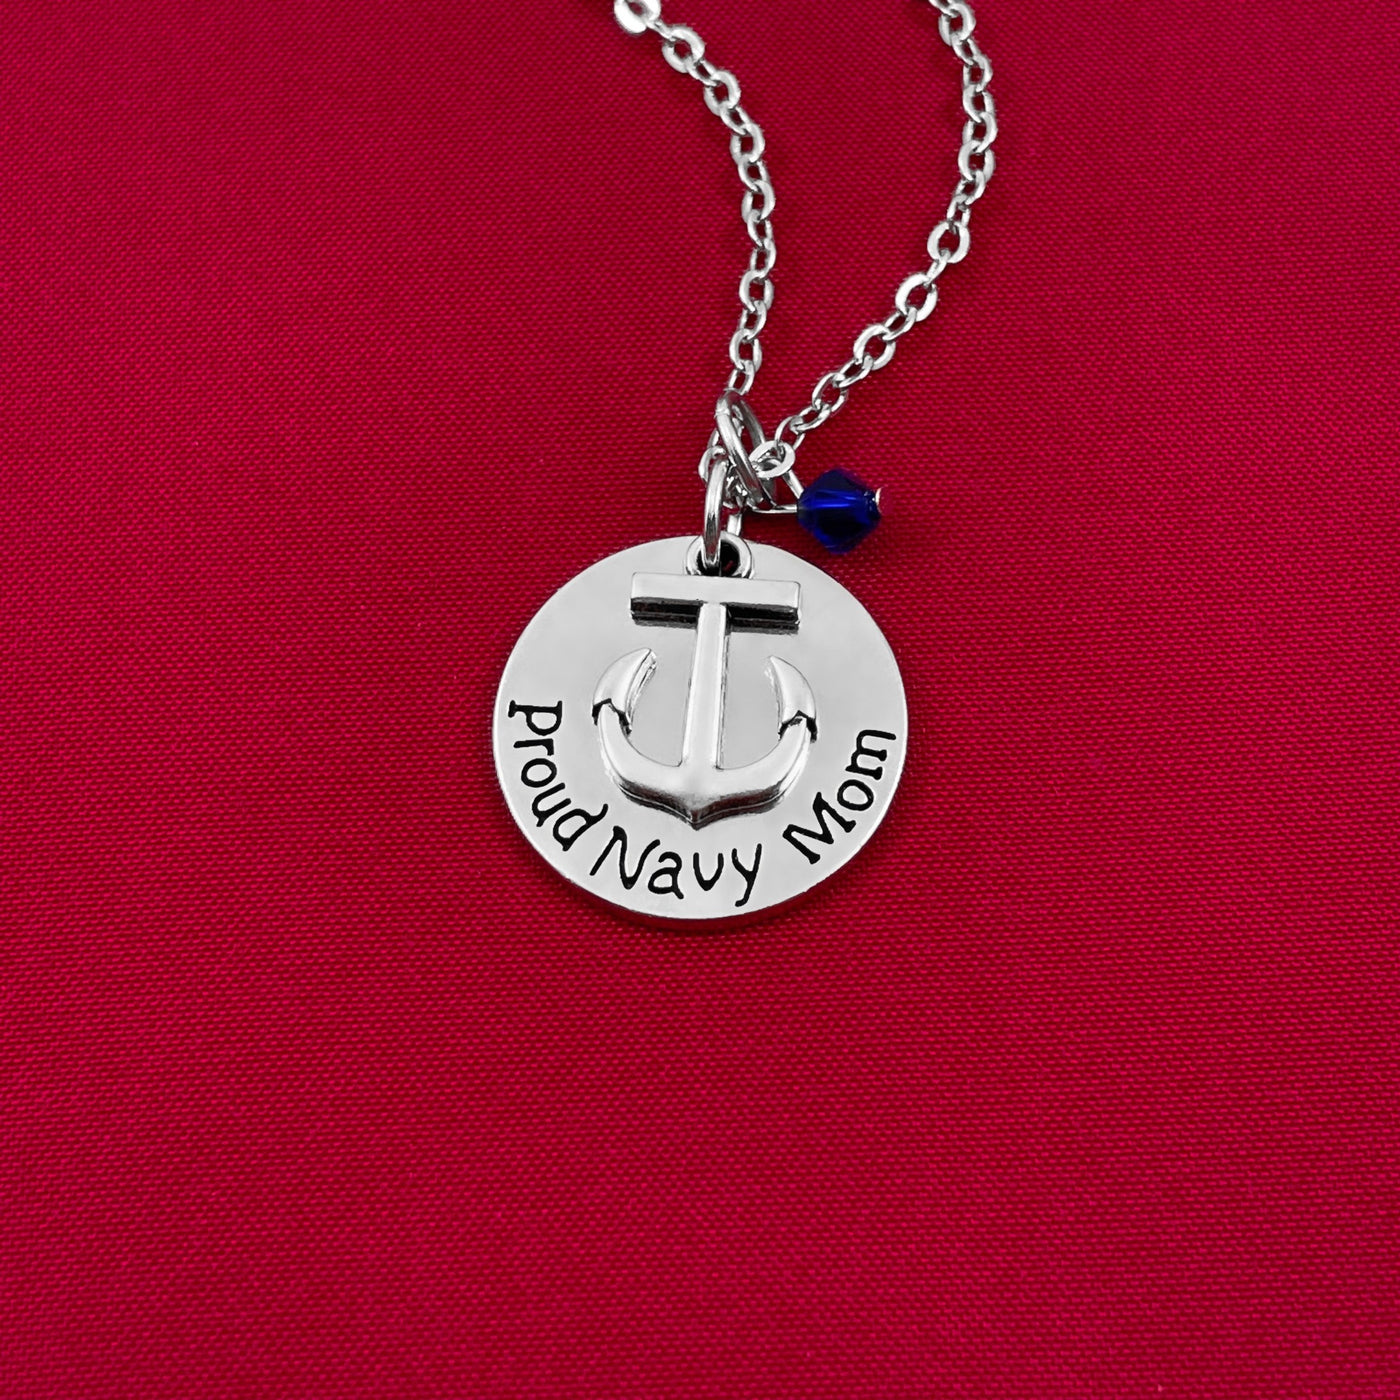 Proud Navy Mom Necklace